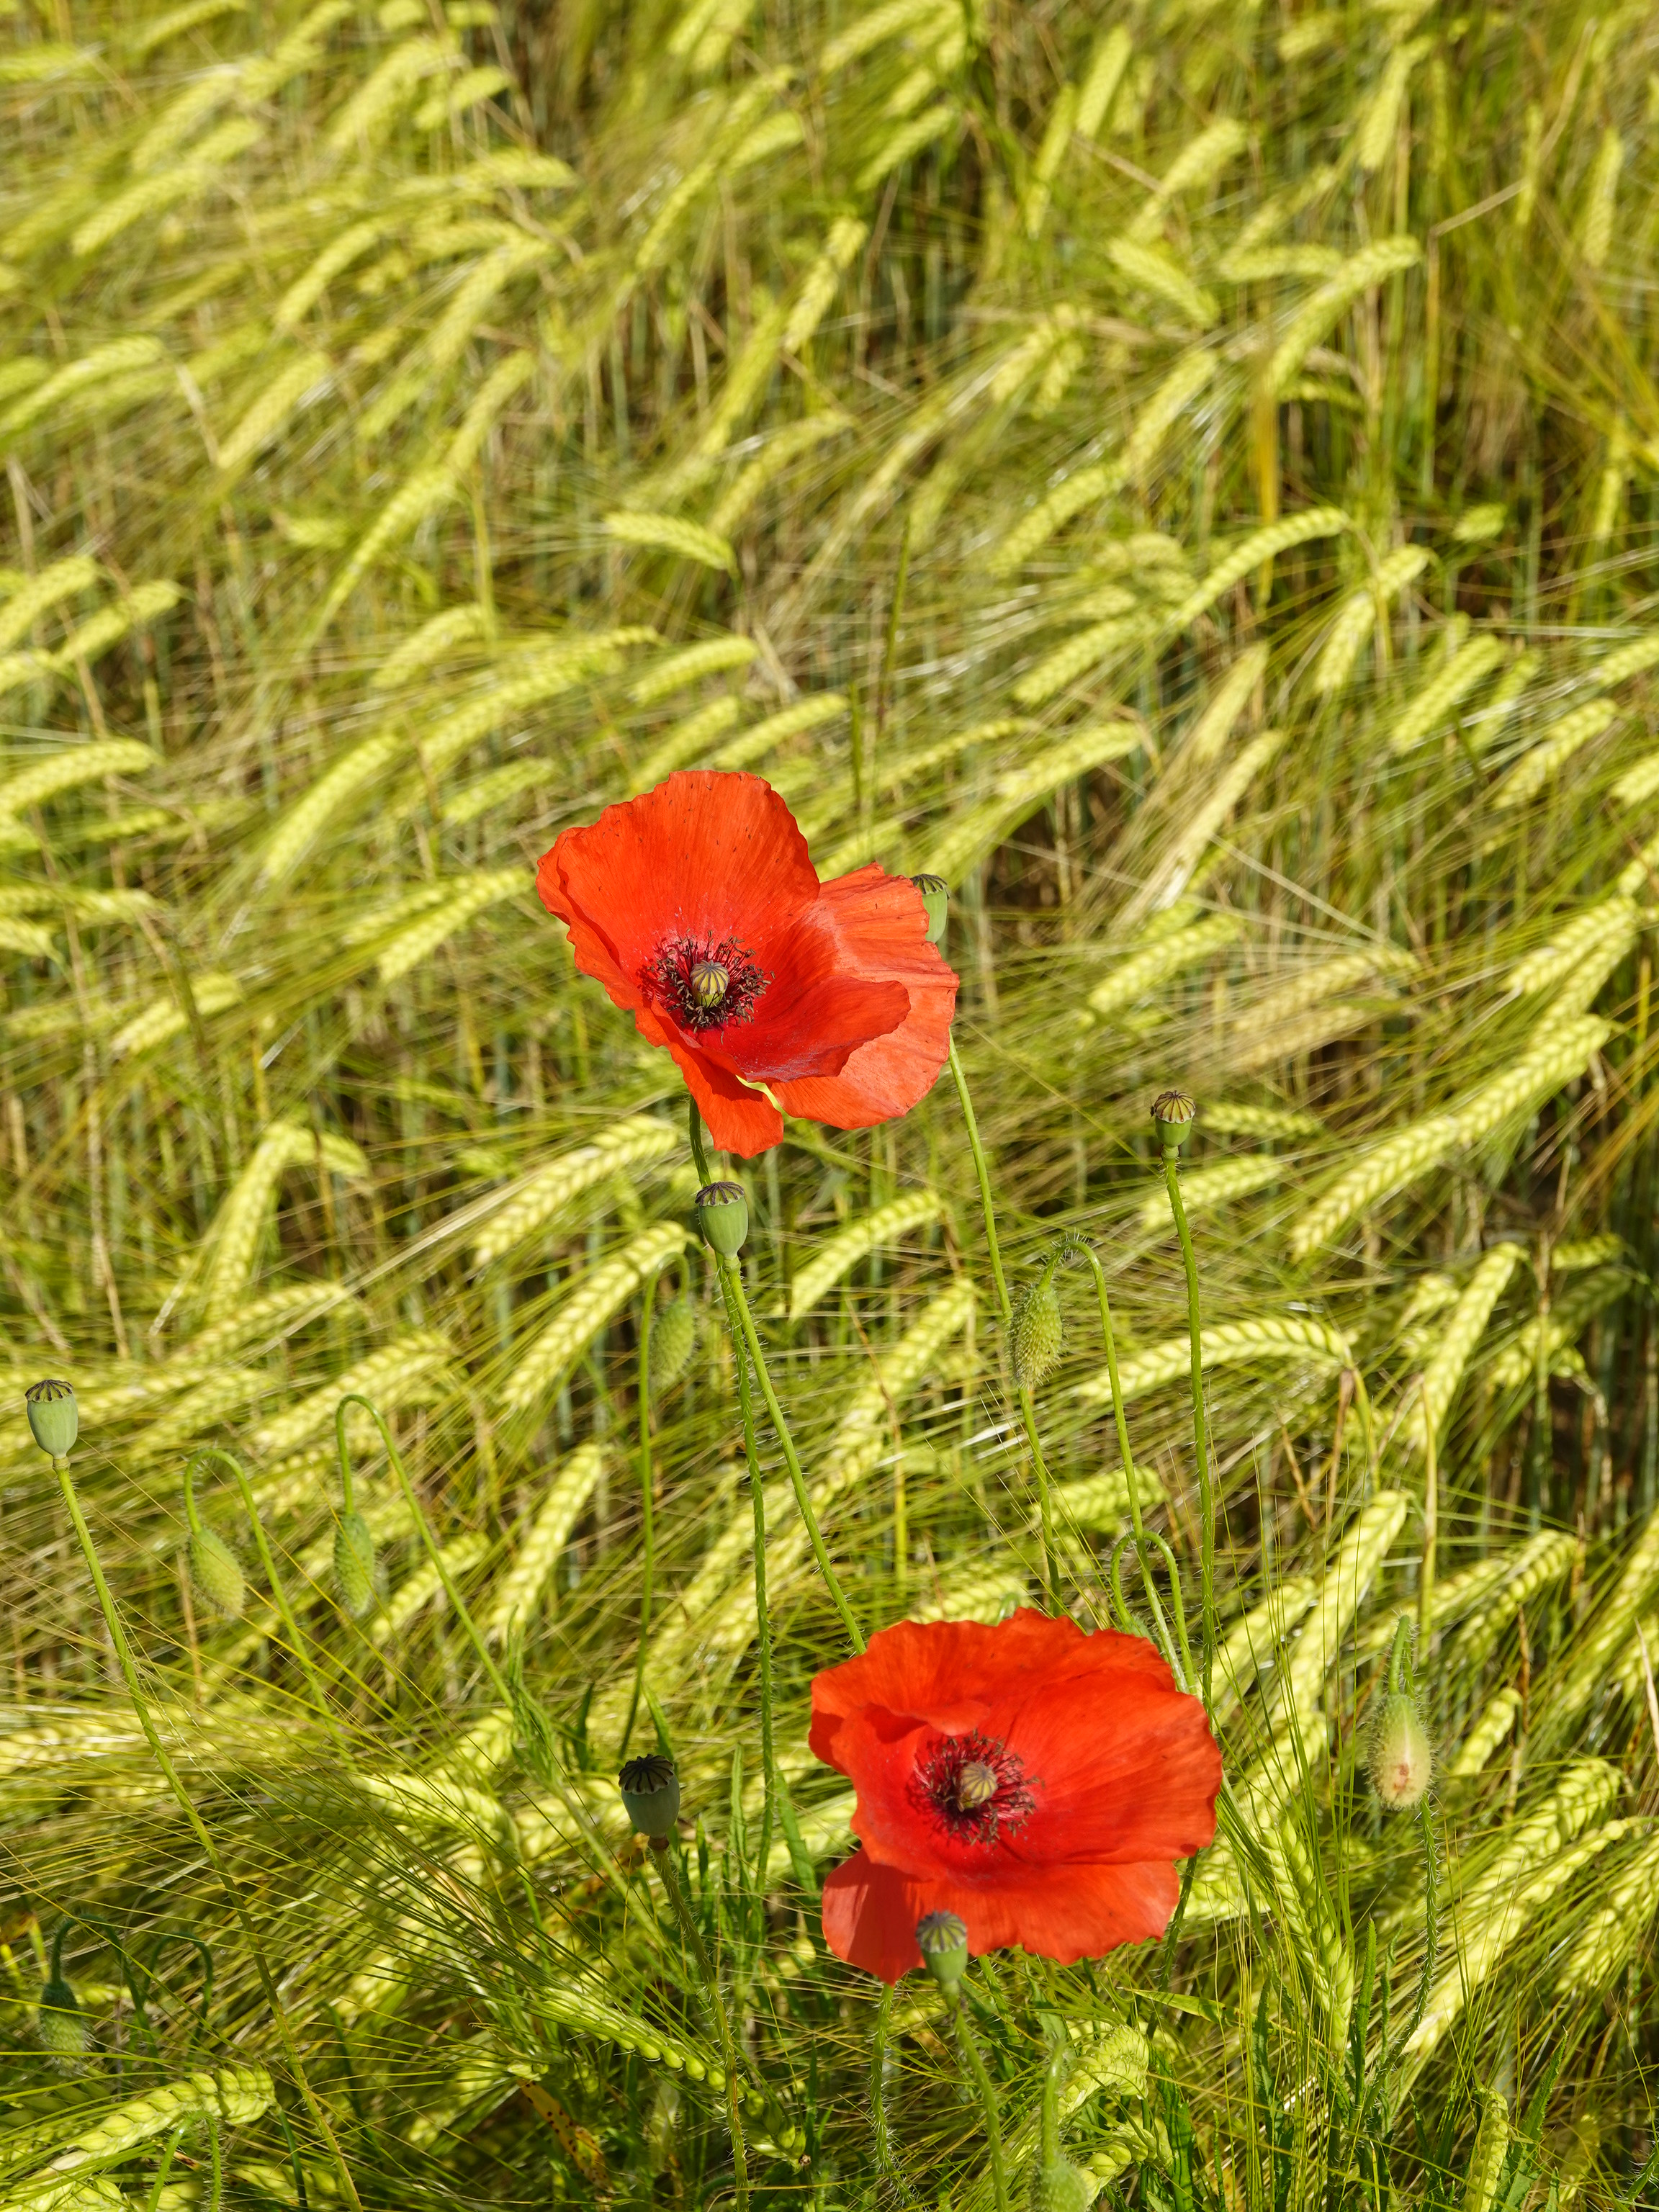 plants, flowers, poppies, cones, red, spikelets